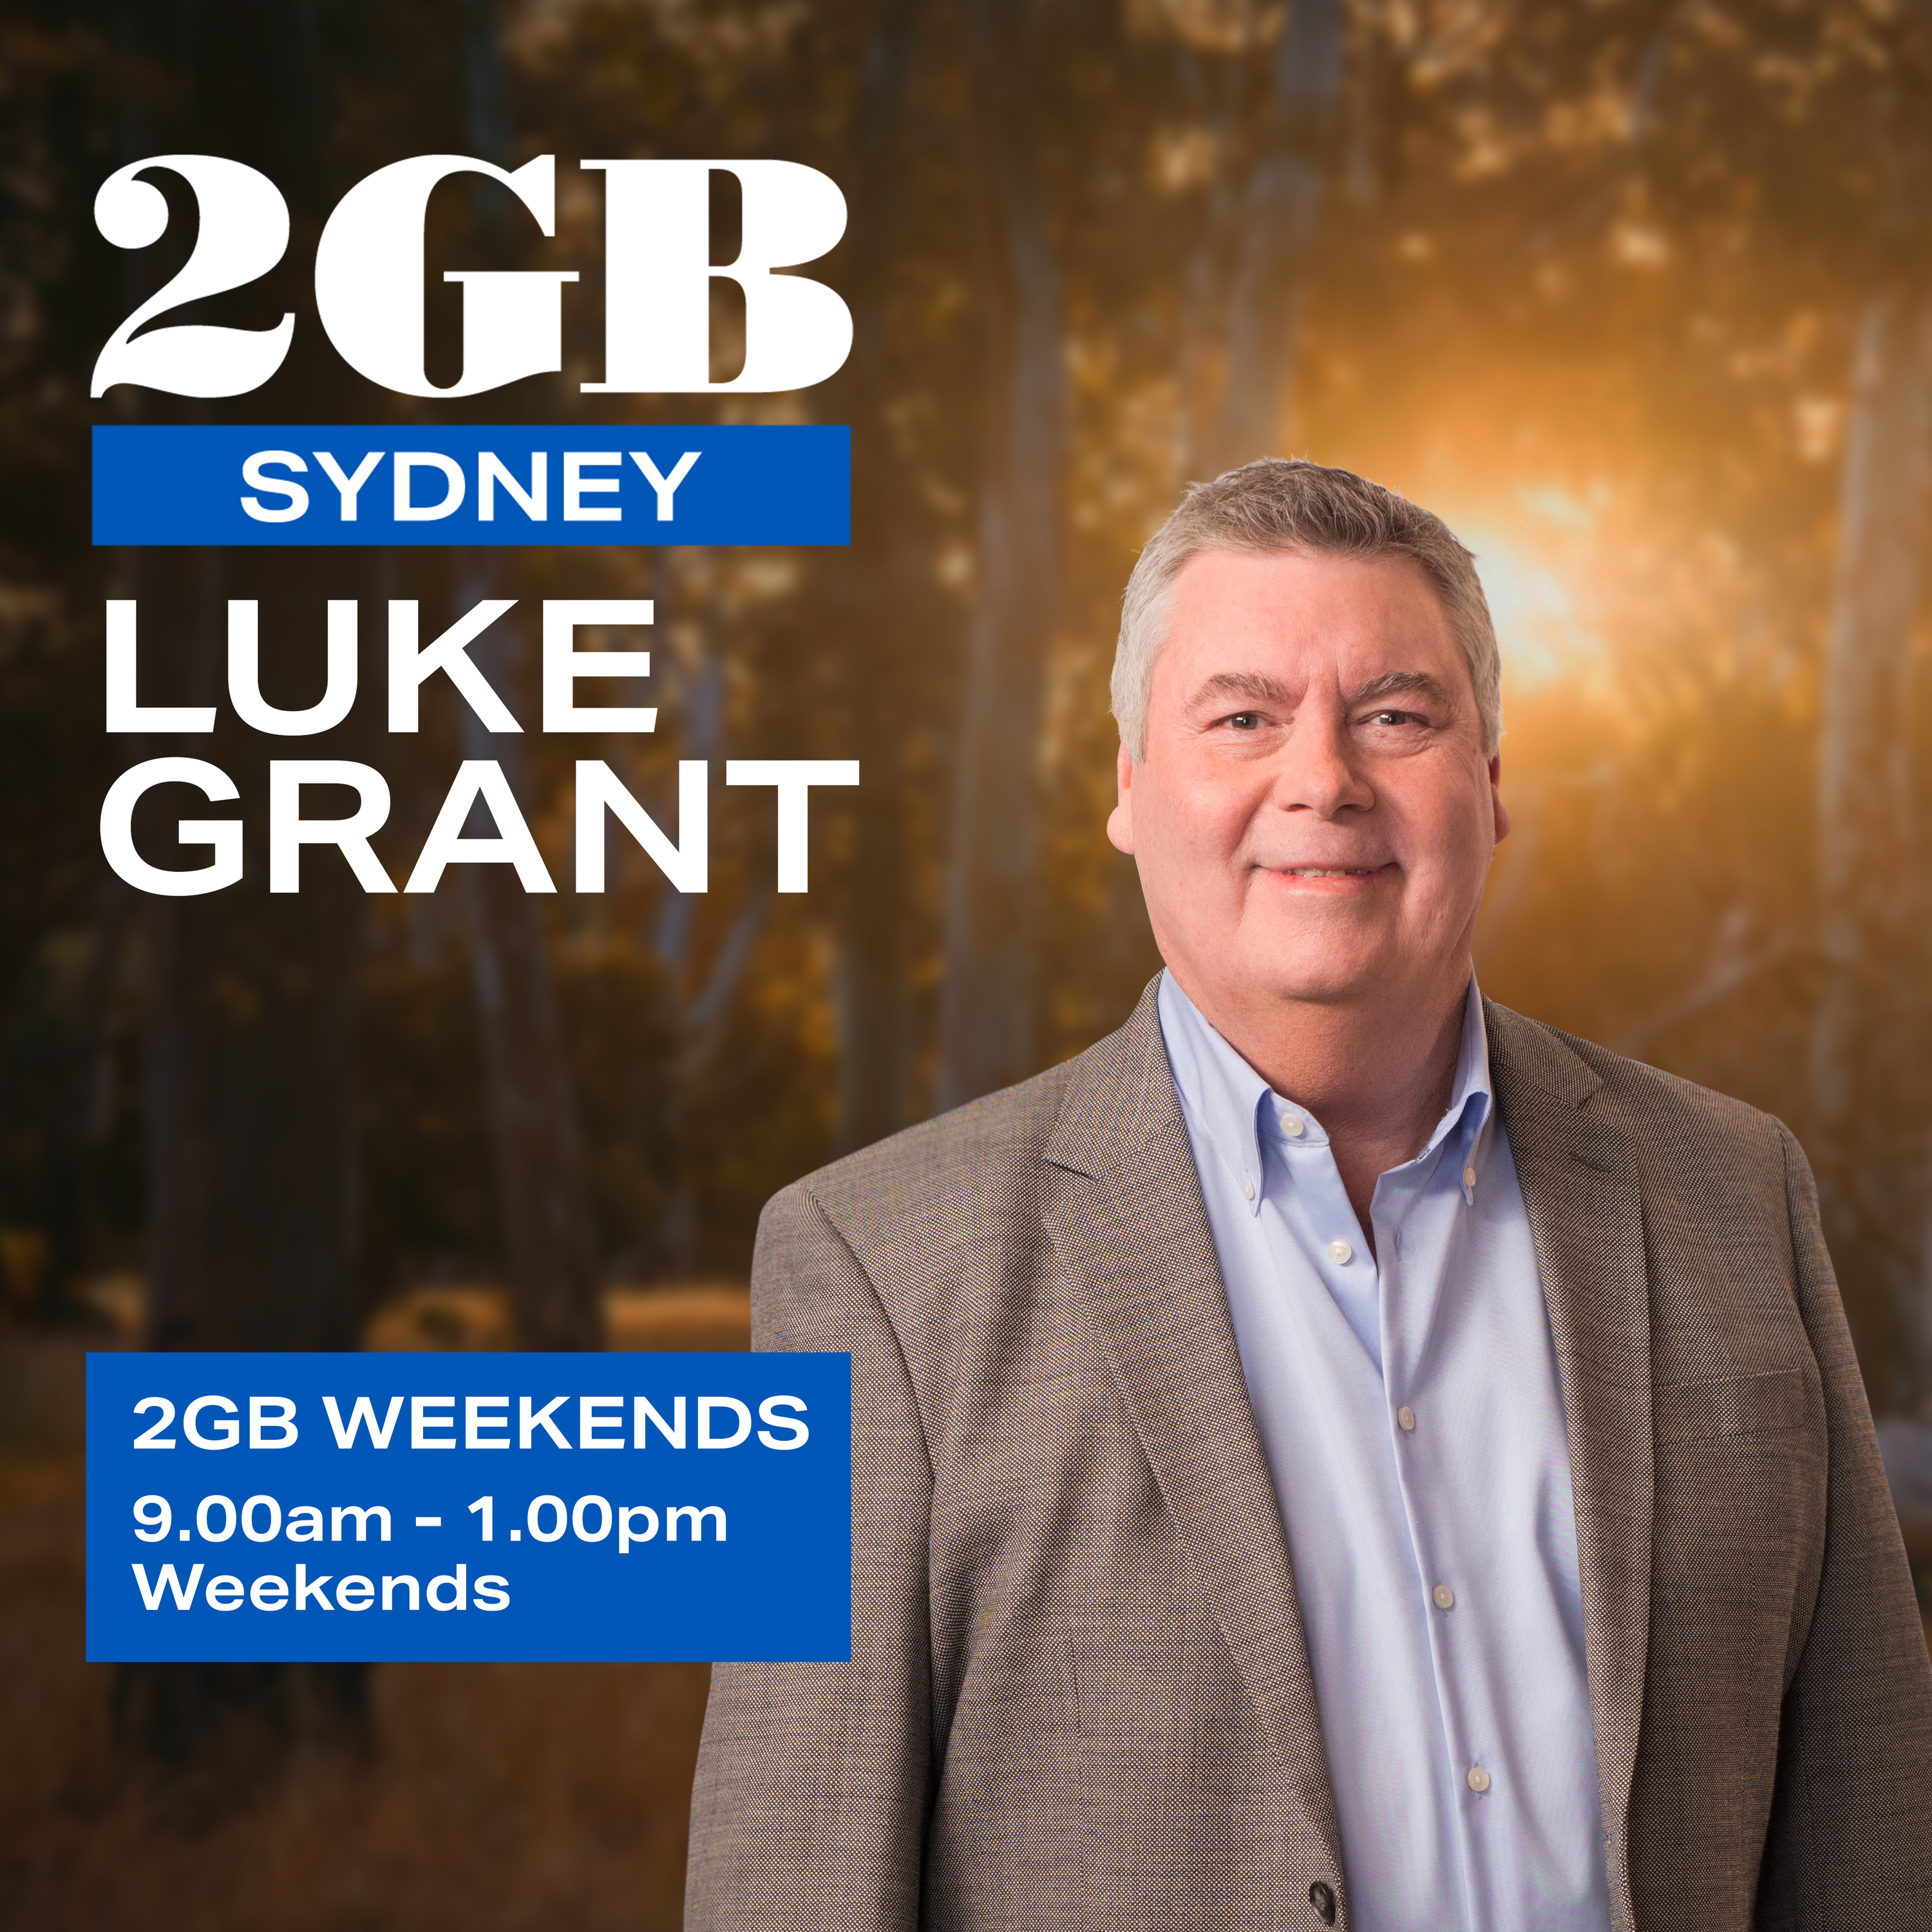 Weekends with Luke Grant - Sunday, 14th of April